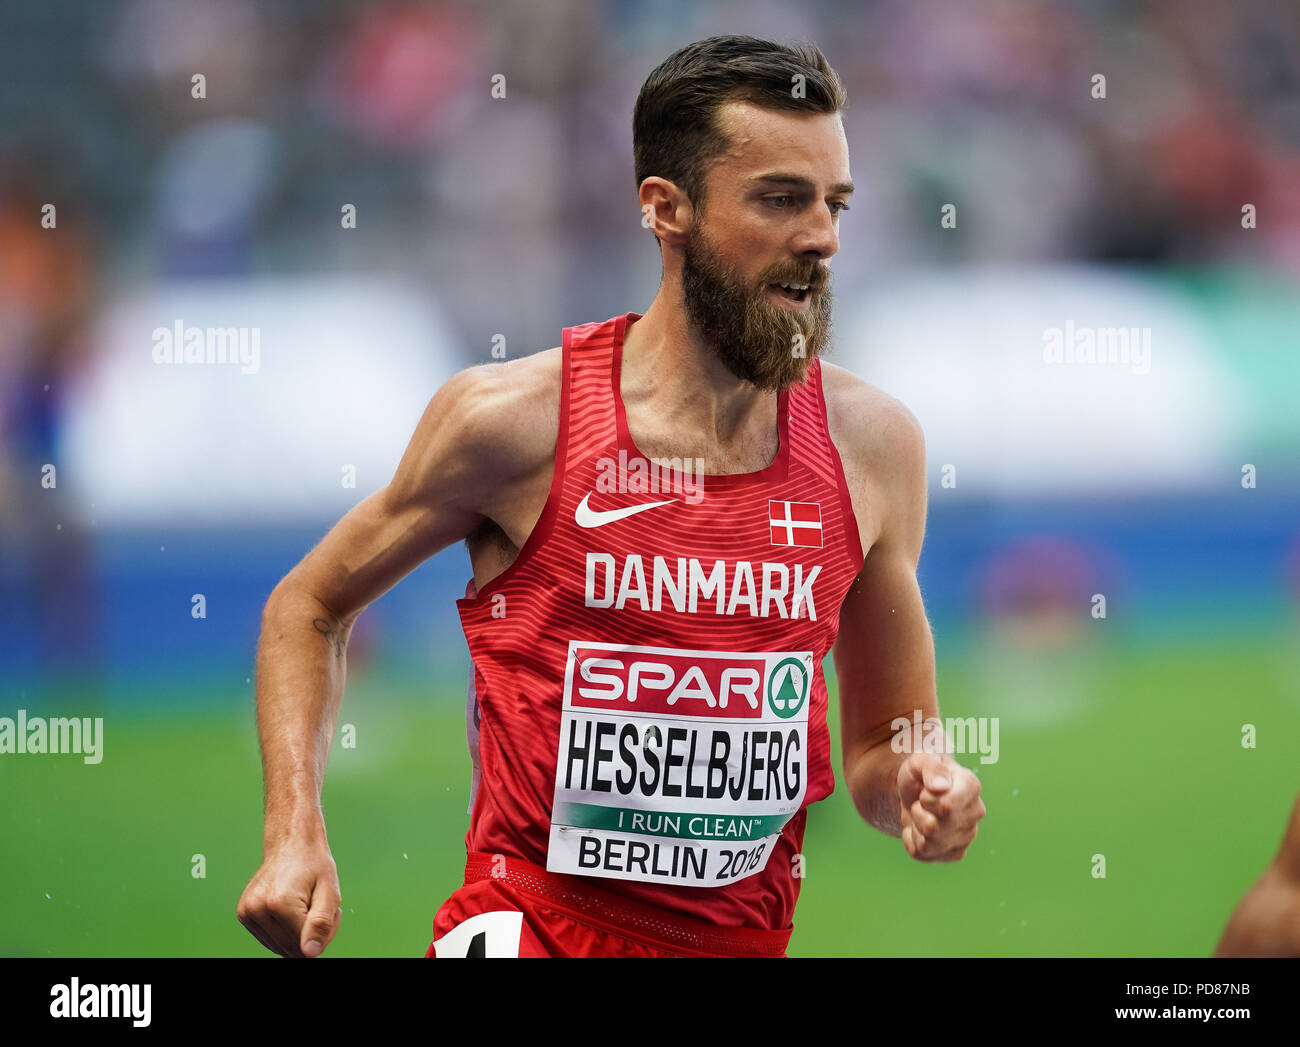 August 7, 2018: Ole Hesslbjerg during 3000m Steeple chase for Men at the Olympic Stadium in Berlin at the European Athletics Championship. Ulrik Pedersen/CSM Stock Photo